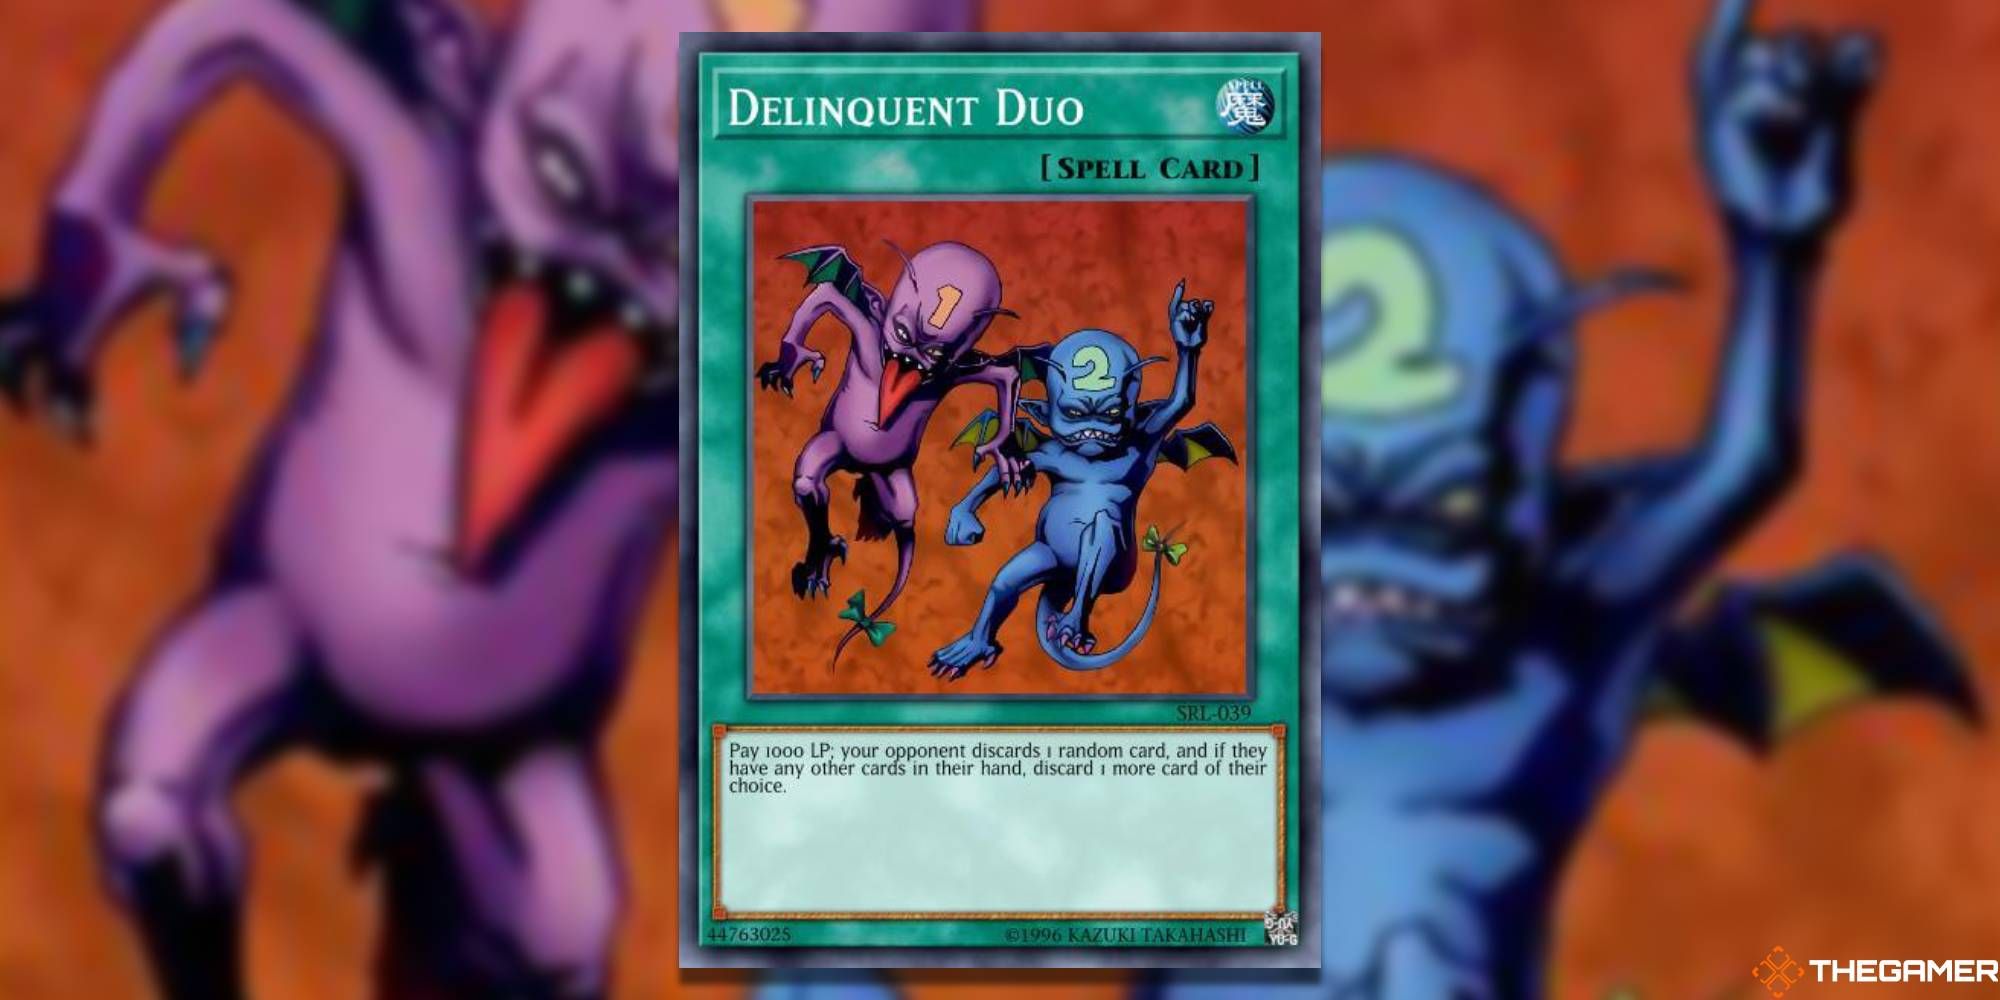 Delinquent Duo from Yu-Gi-Oh Spell Ruler